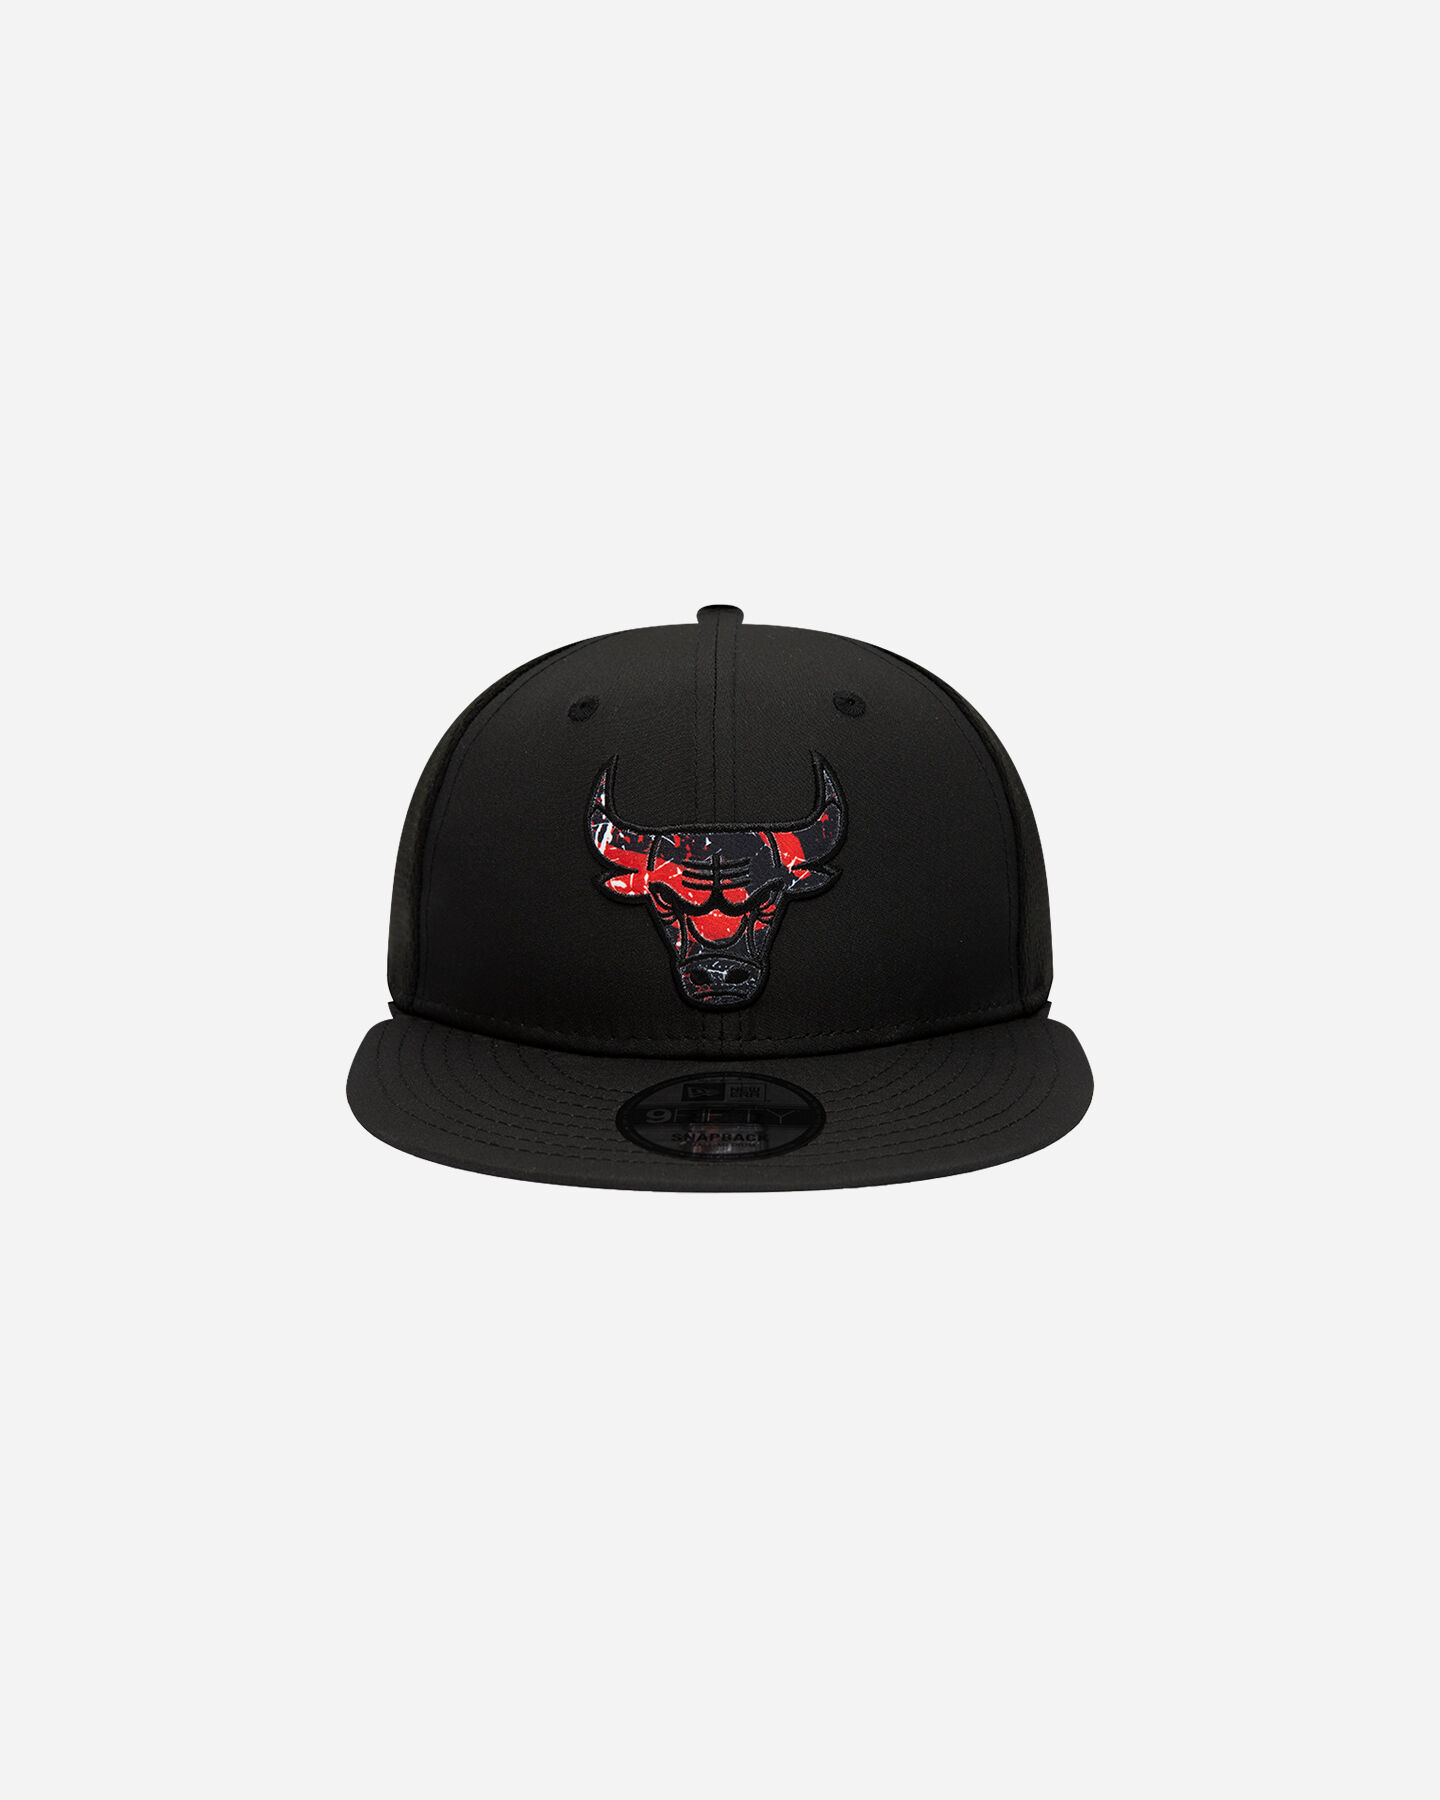  Cappellino NEW ERA 9FIFTY CHICAGO BULLS PRINT INFILL  S5546239 scatto 1